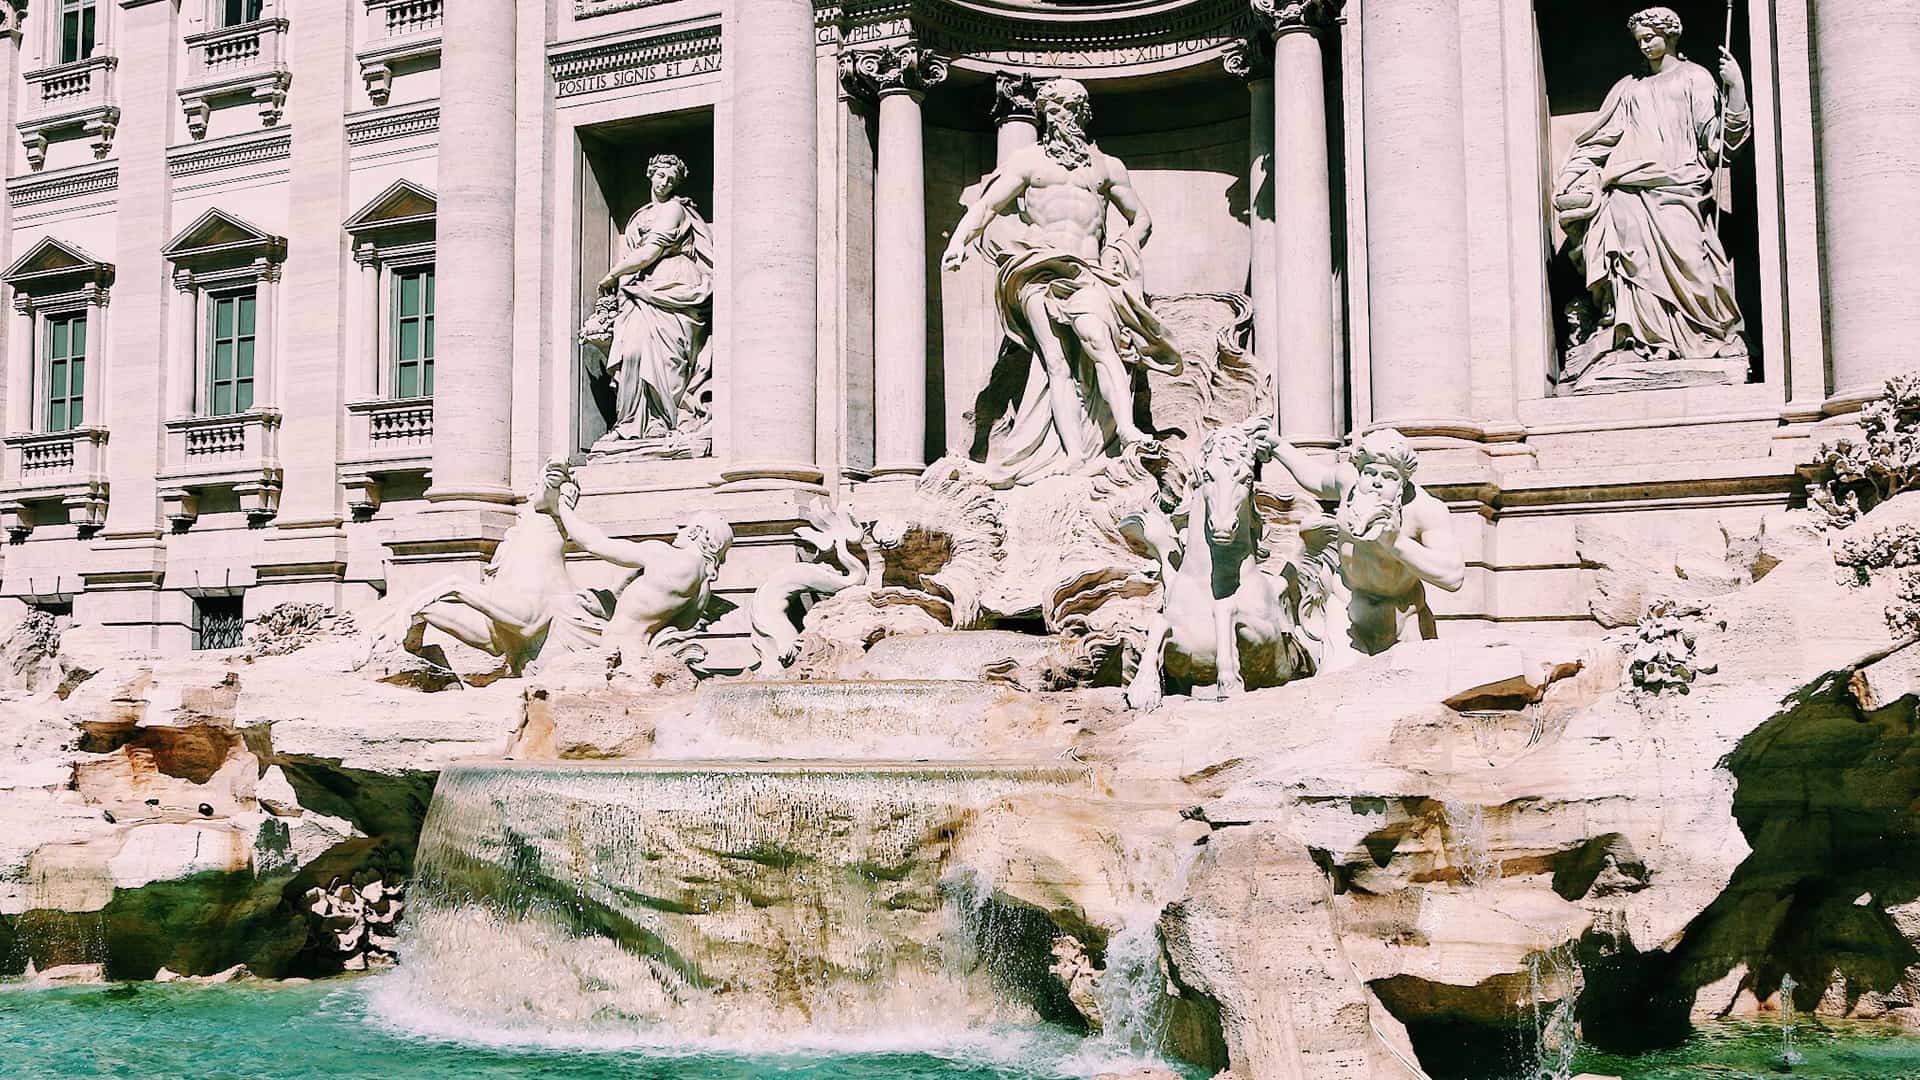 Sculptures and a fountain in Rome, Italy